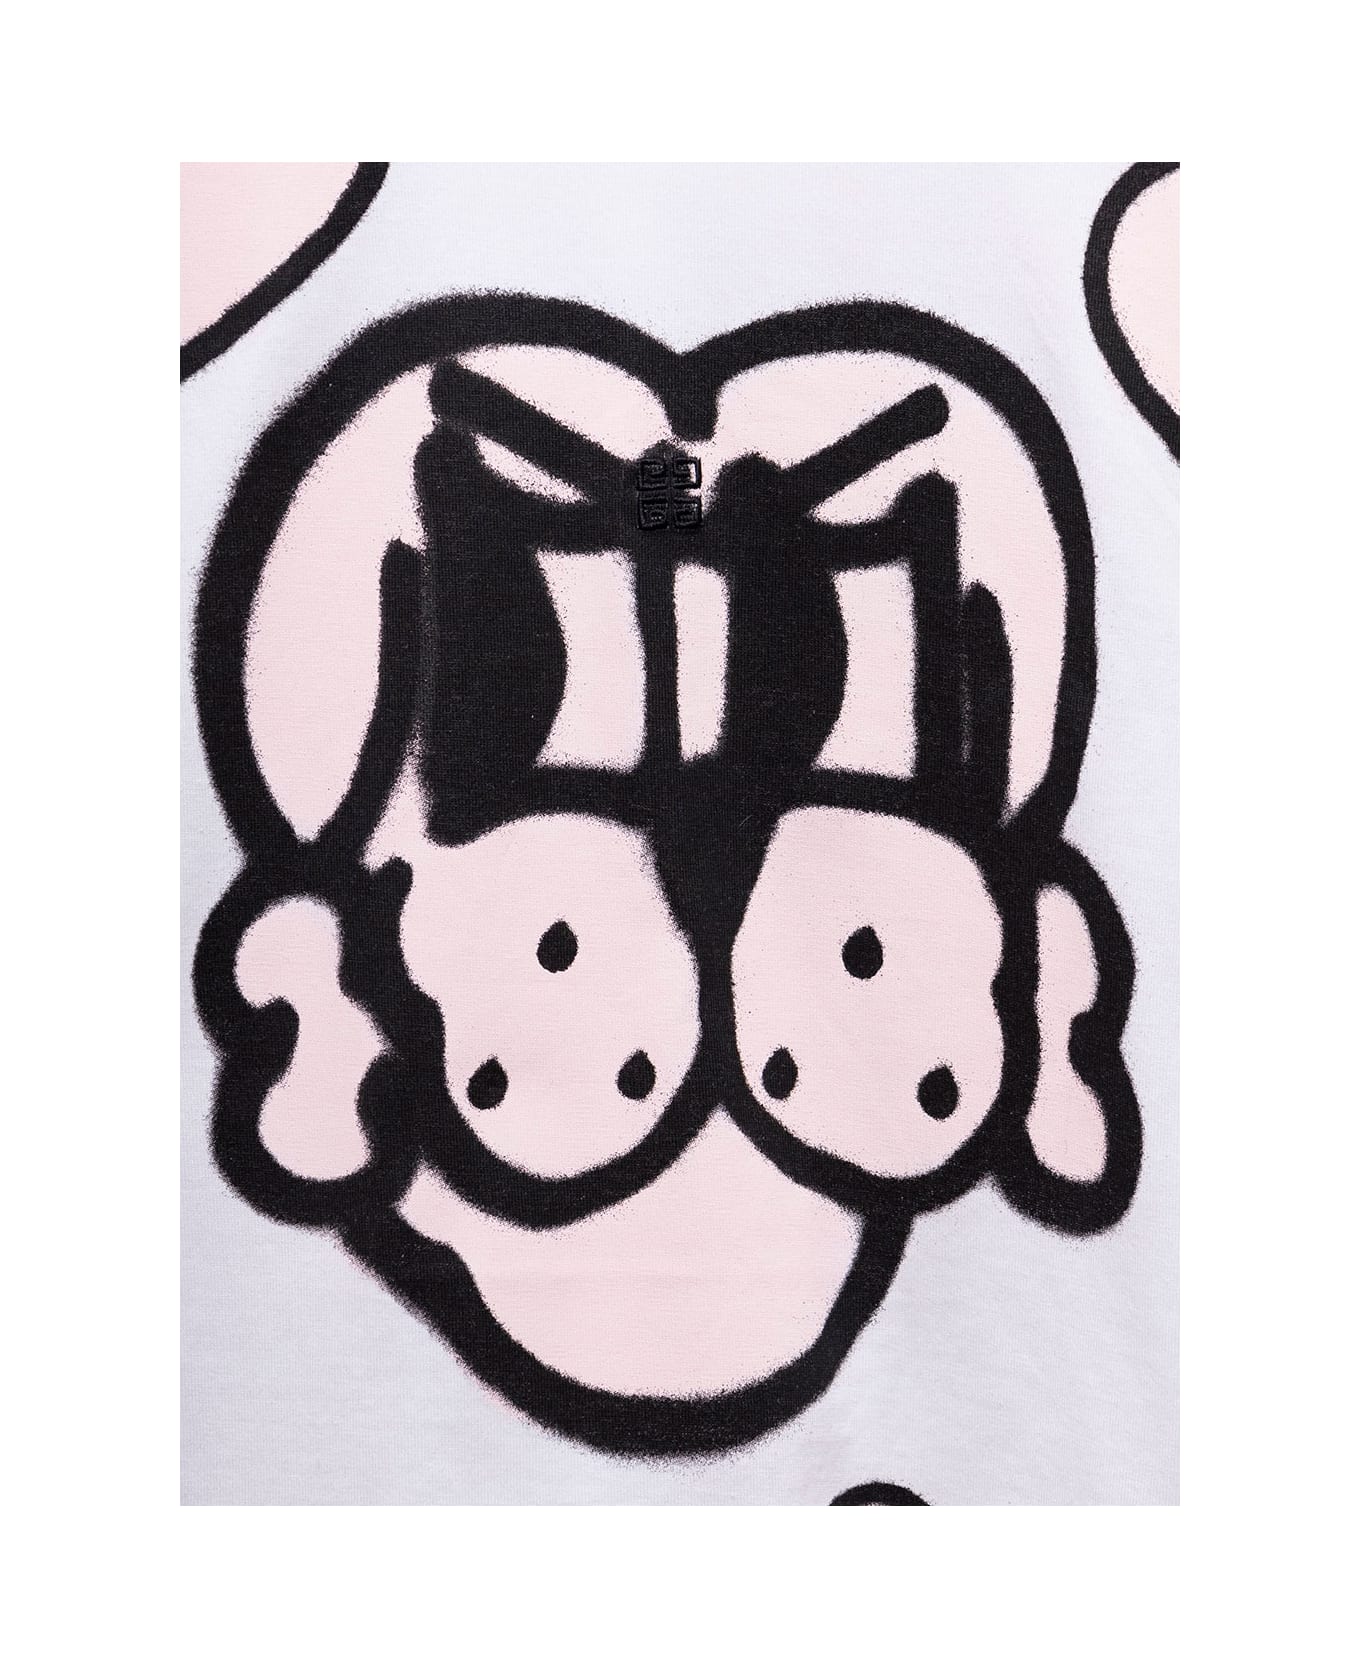 Givenchy Bart T-shirt With Graphic Print Givenchy Kids Girl - White